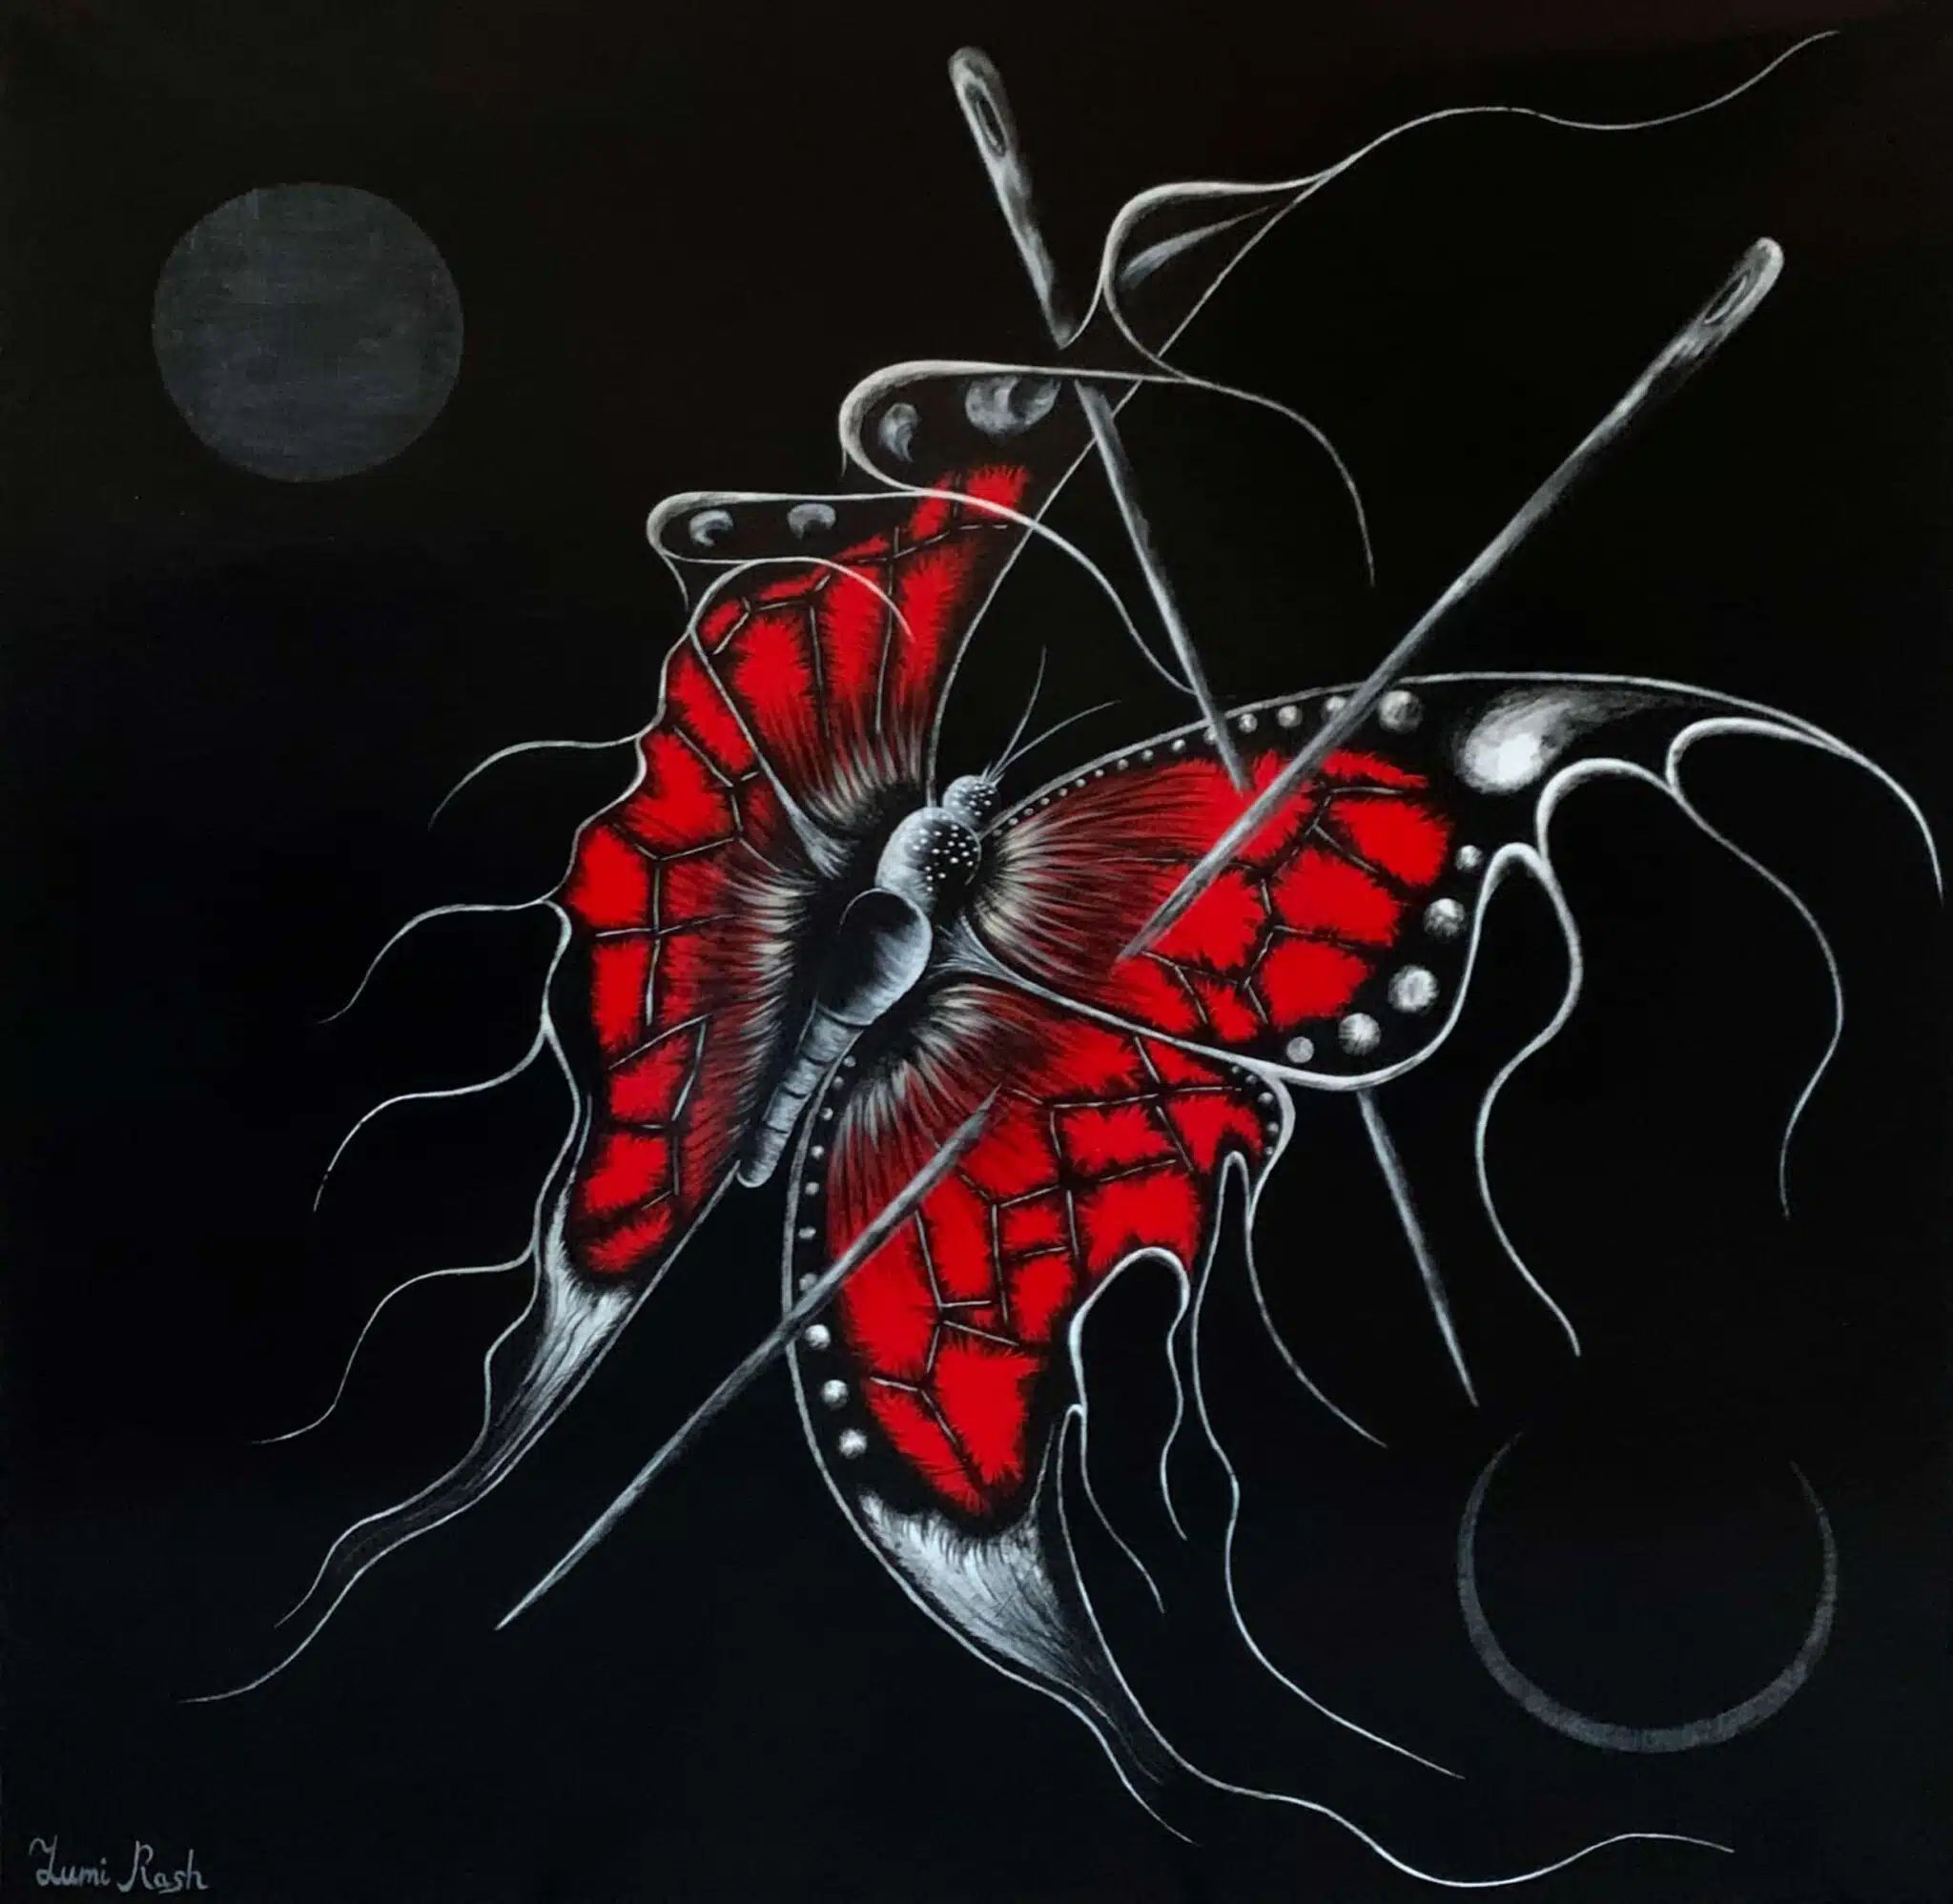 "Papillon" is a dark surrealistic painting portraying the ambiguous state between life and death. 